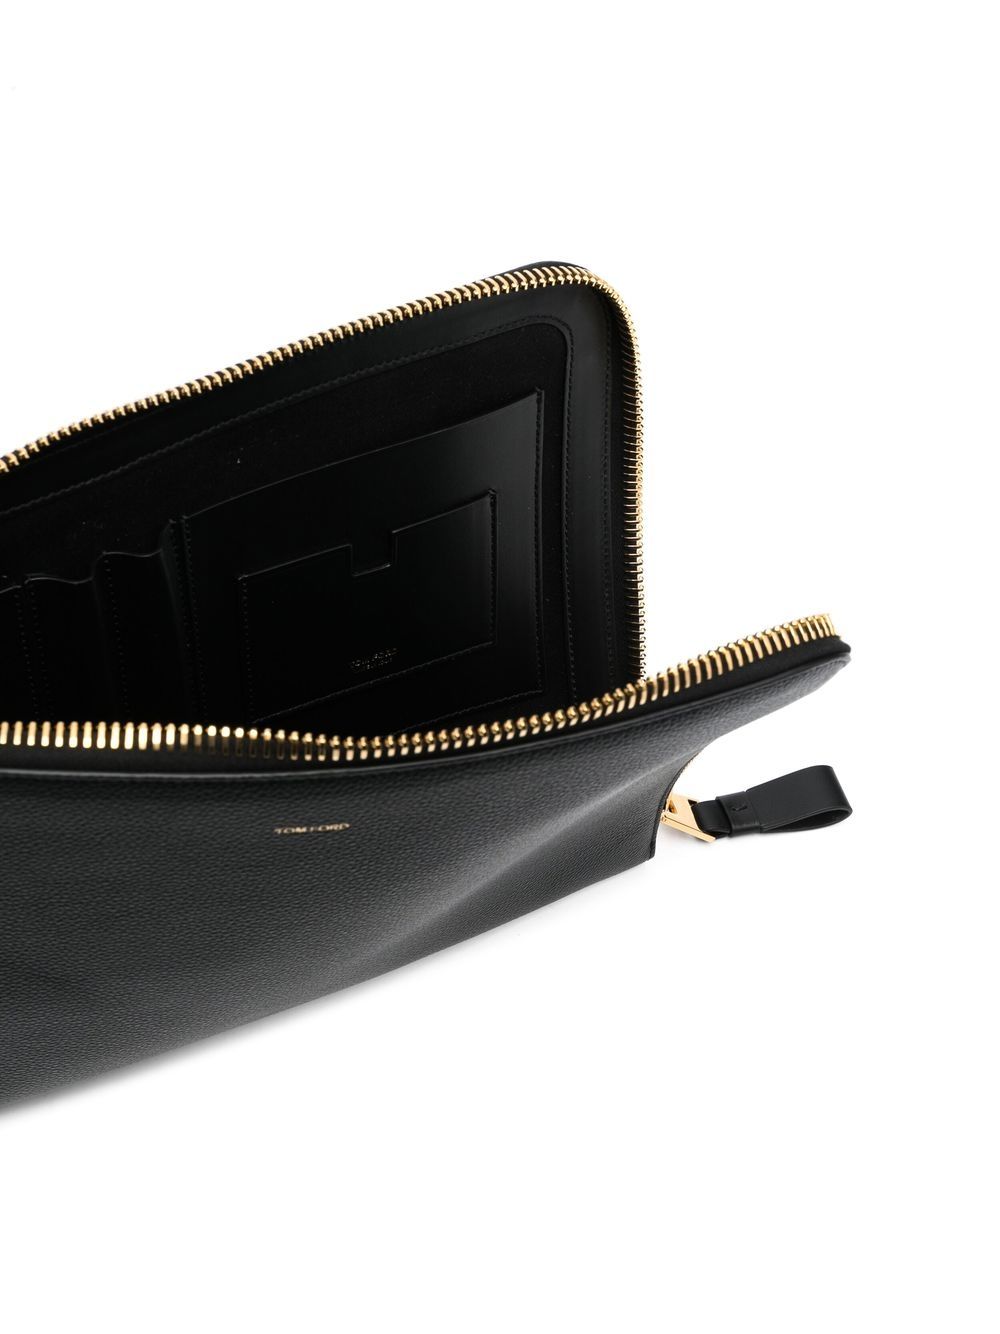 TOM FORD Men's Black Zip-Around Leather Wallet for FW23